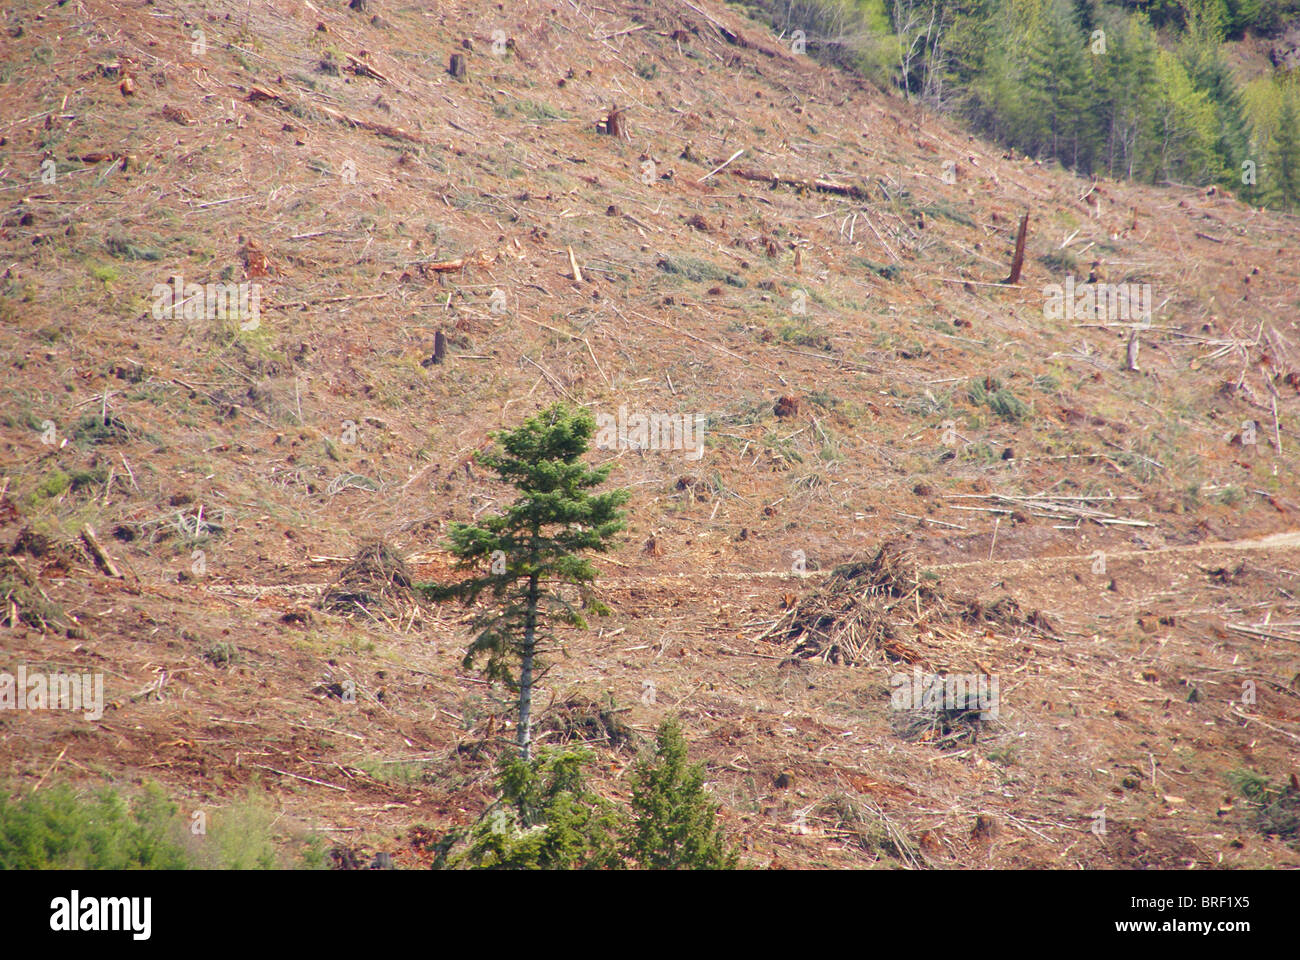 Clear cut logging slope, just outside Willamette National Forest, Central Oregon Cascades Stock Photo